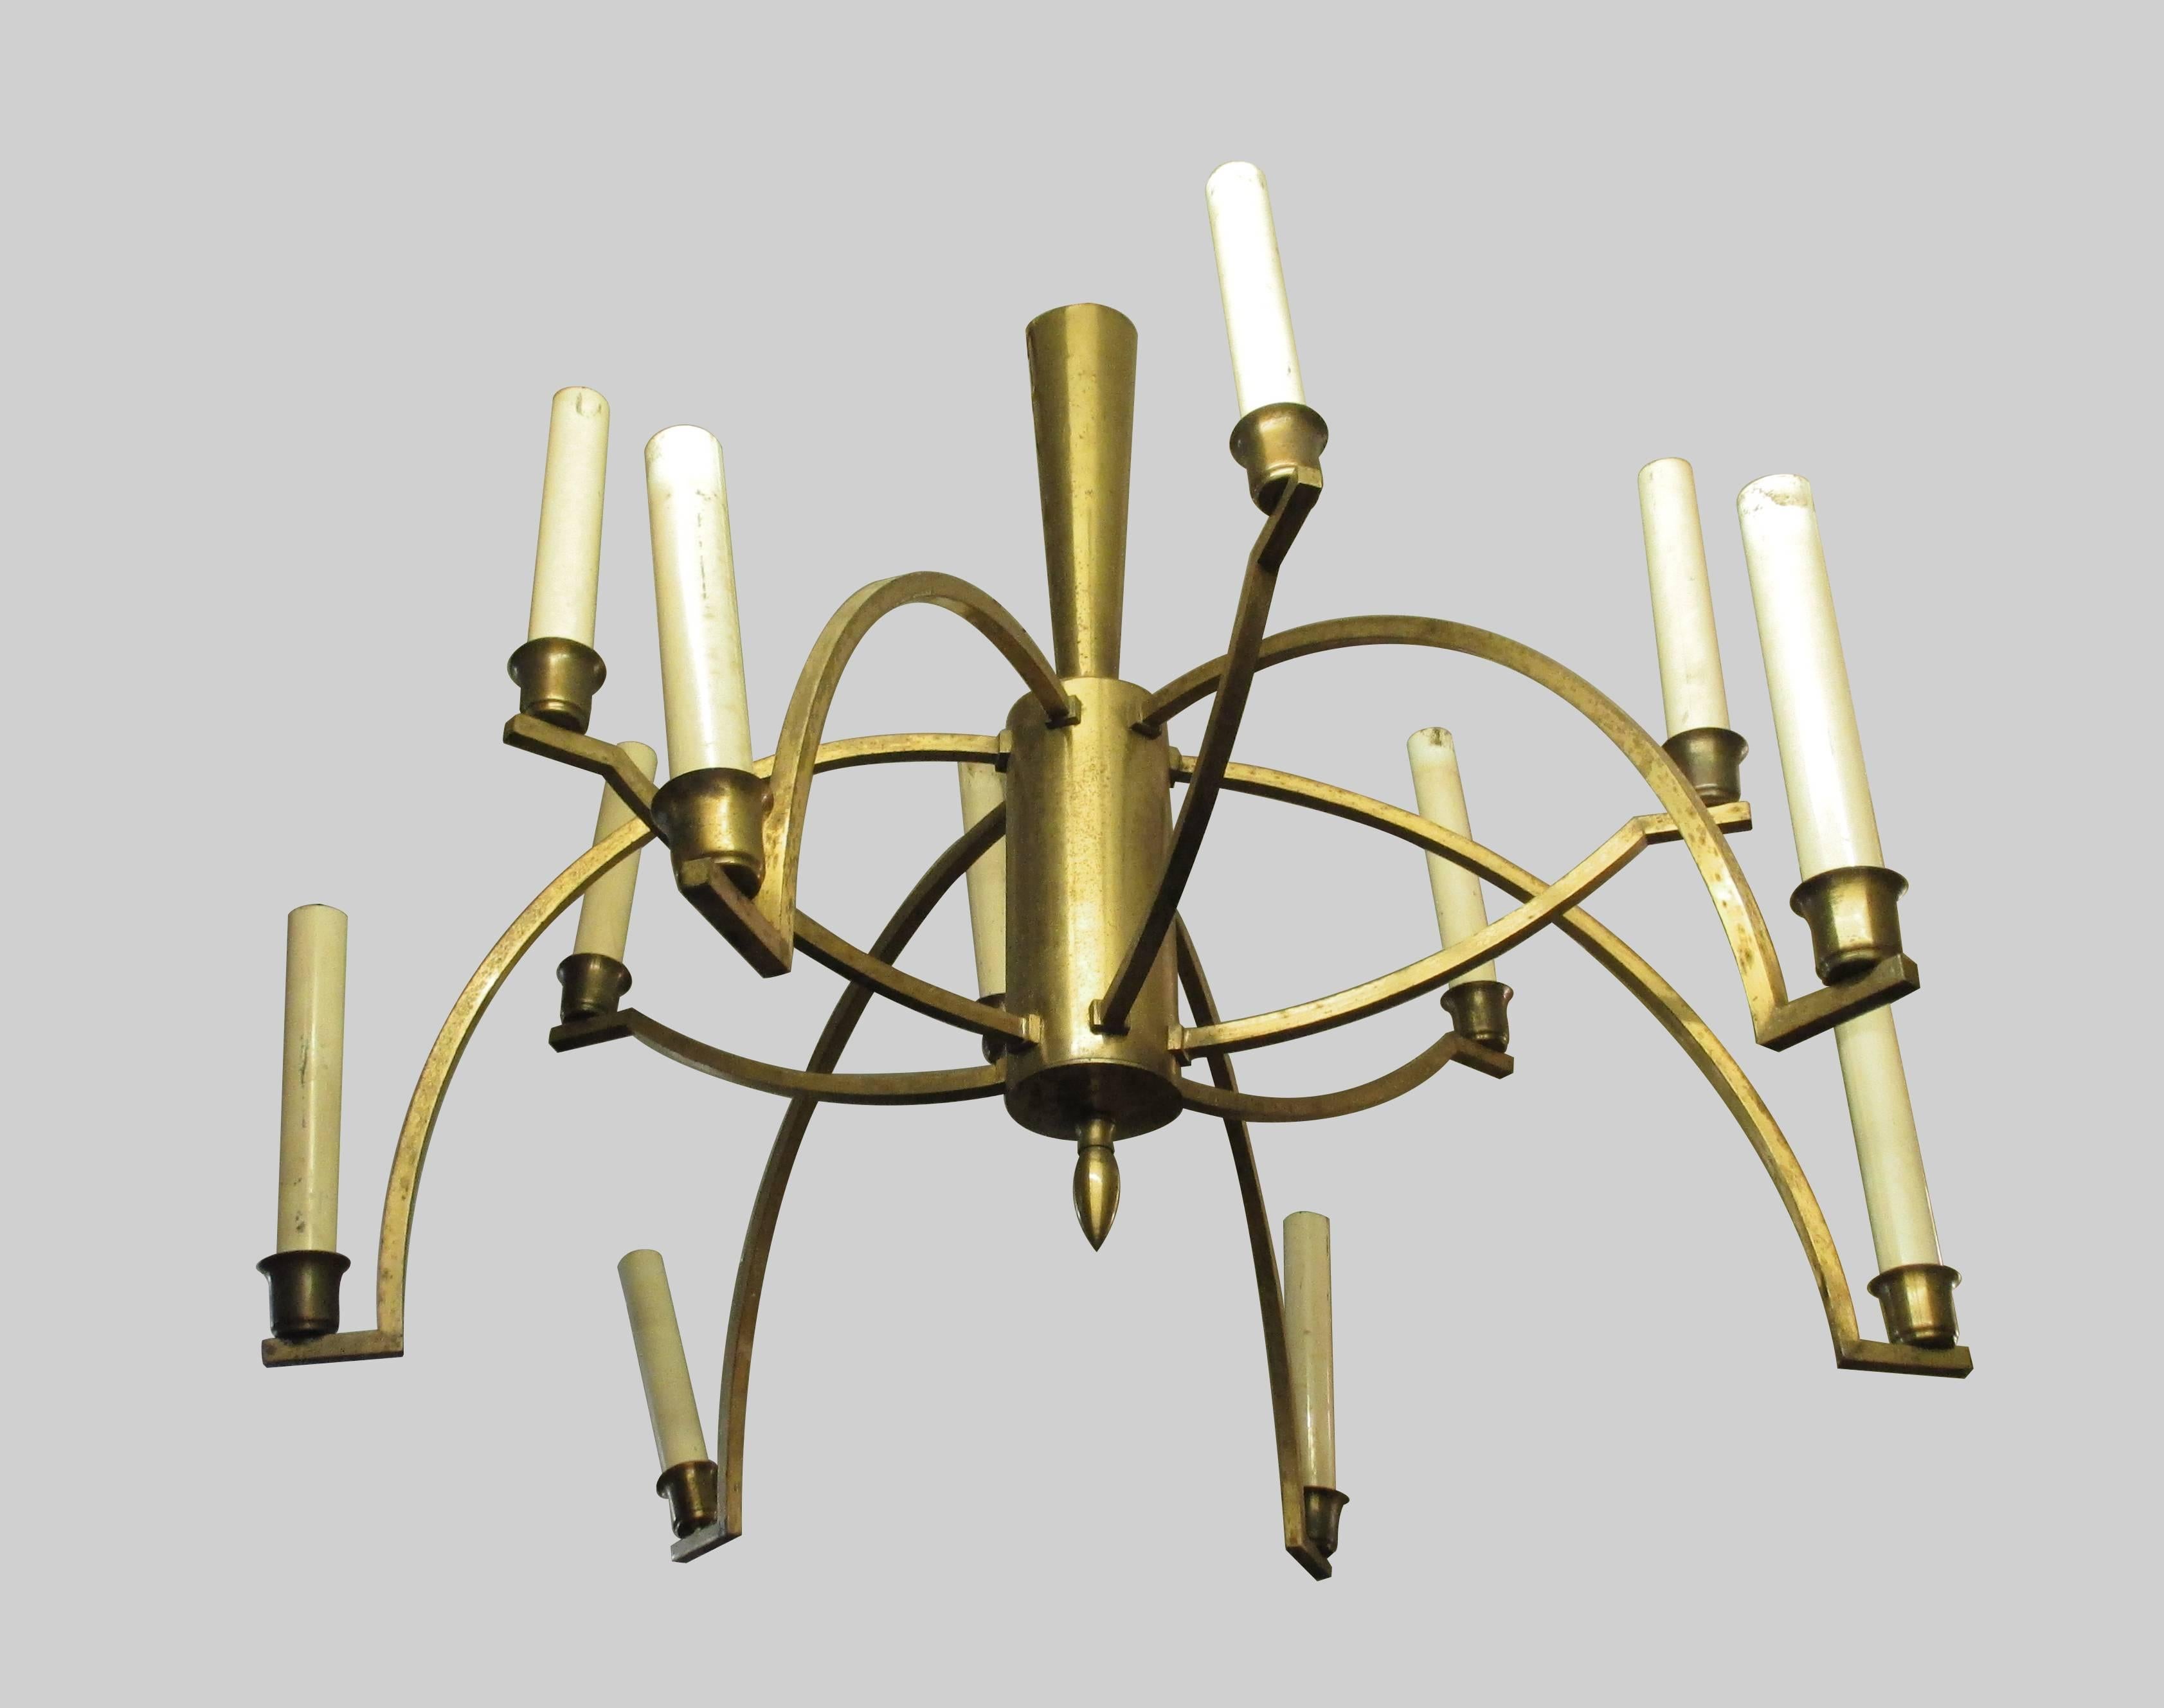 This a big chandelier by Mexican master Arturo Pani in the style of atomic era. Made in brass, each 